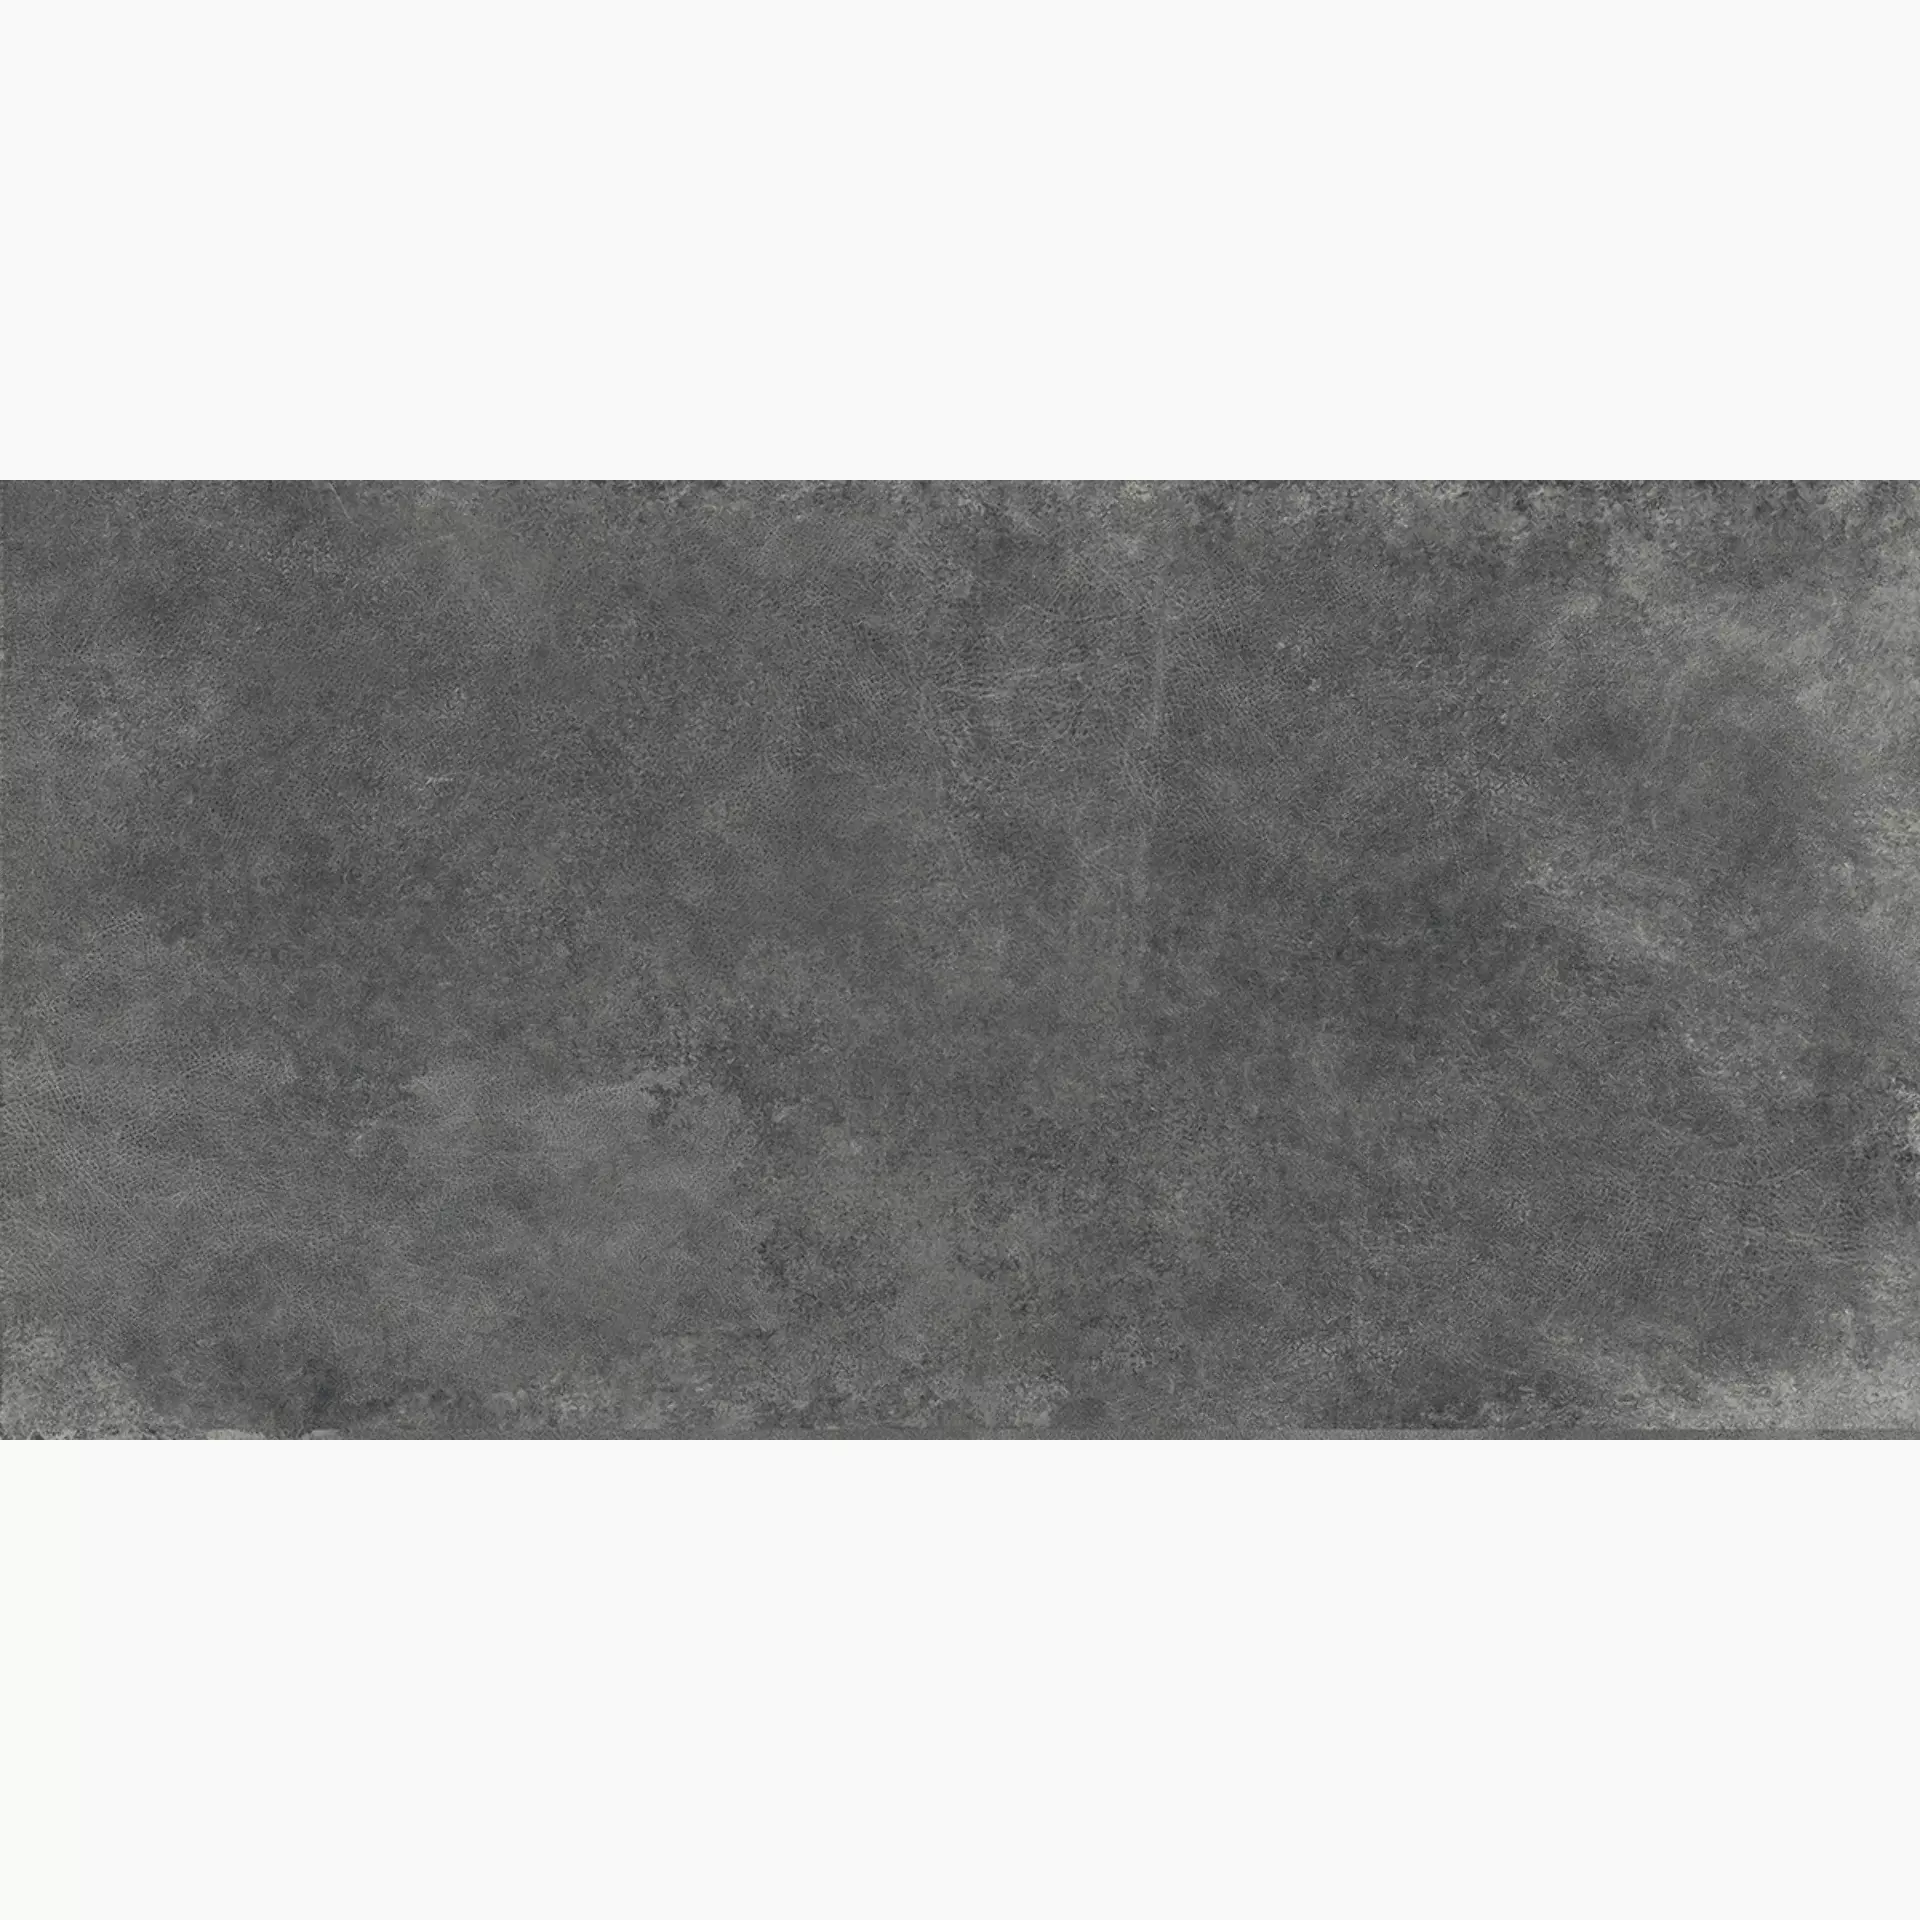 Diesel Hard Leather Slate Lappato 892404 60x120cm rectified 9mm